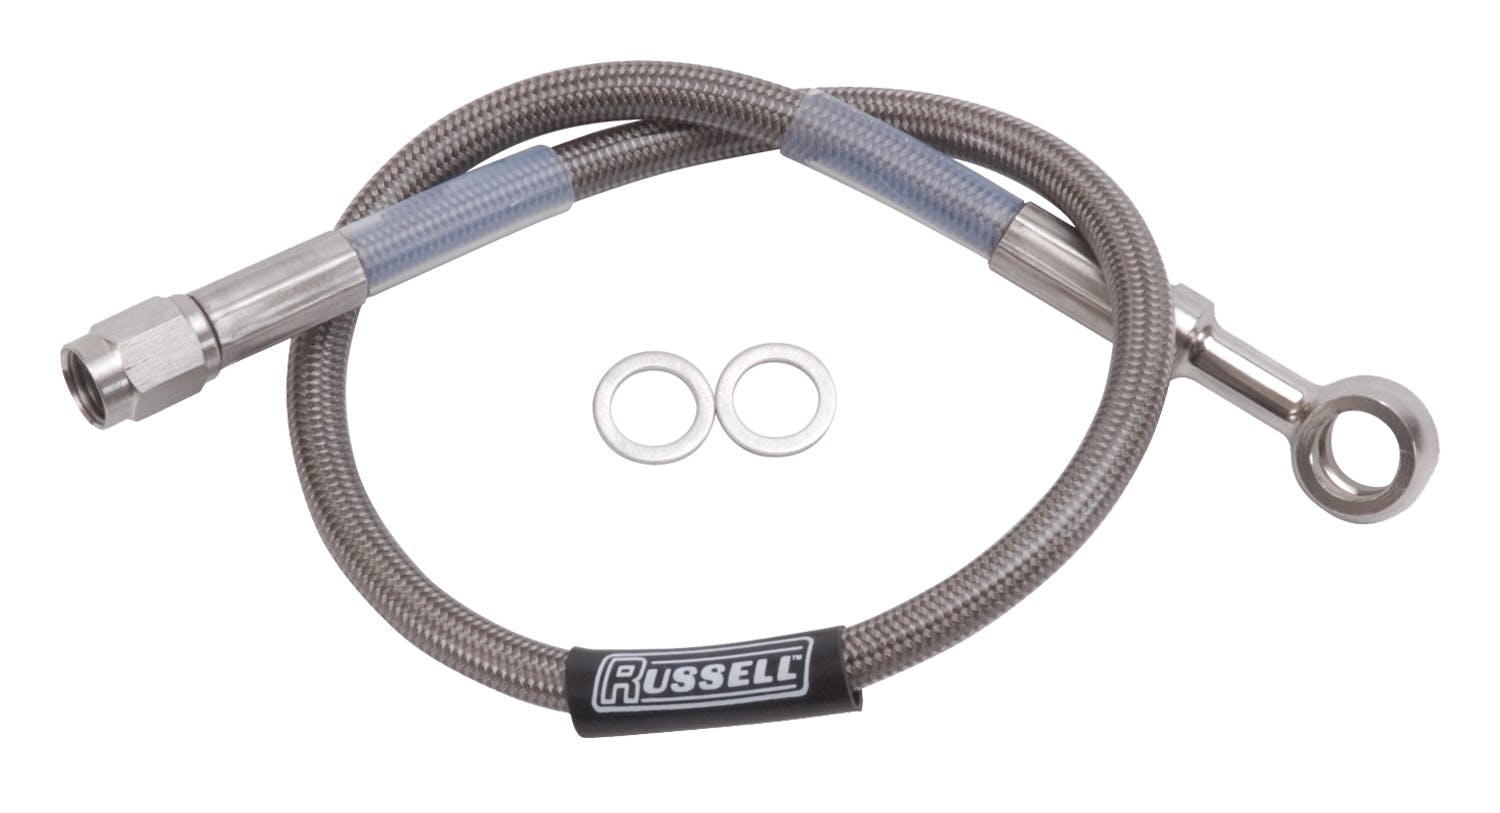 Russell 657222 Brake Line Assembly  20in 10mm -3/8in Banjo To Straight #3   Endura / Stree